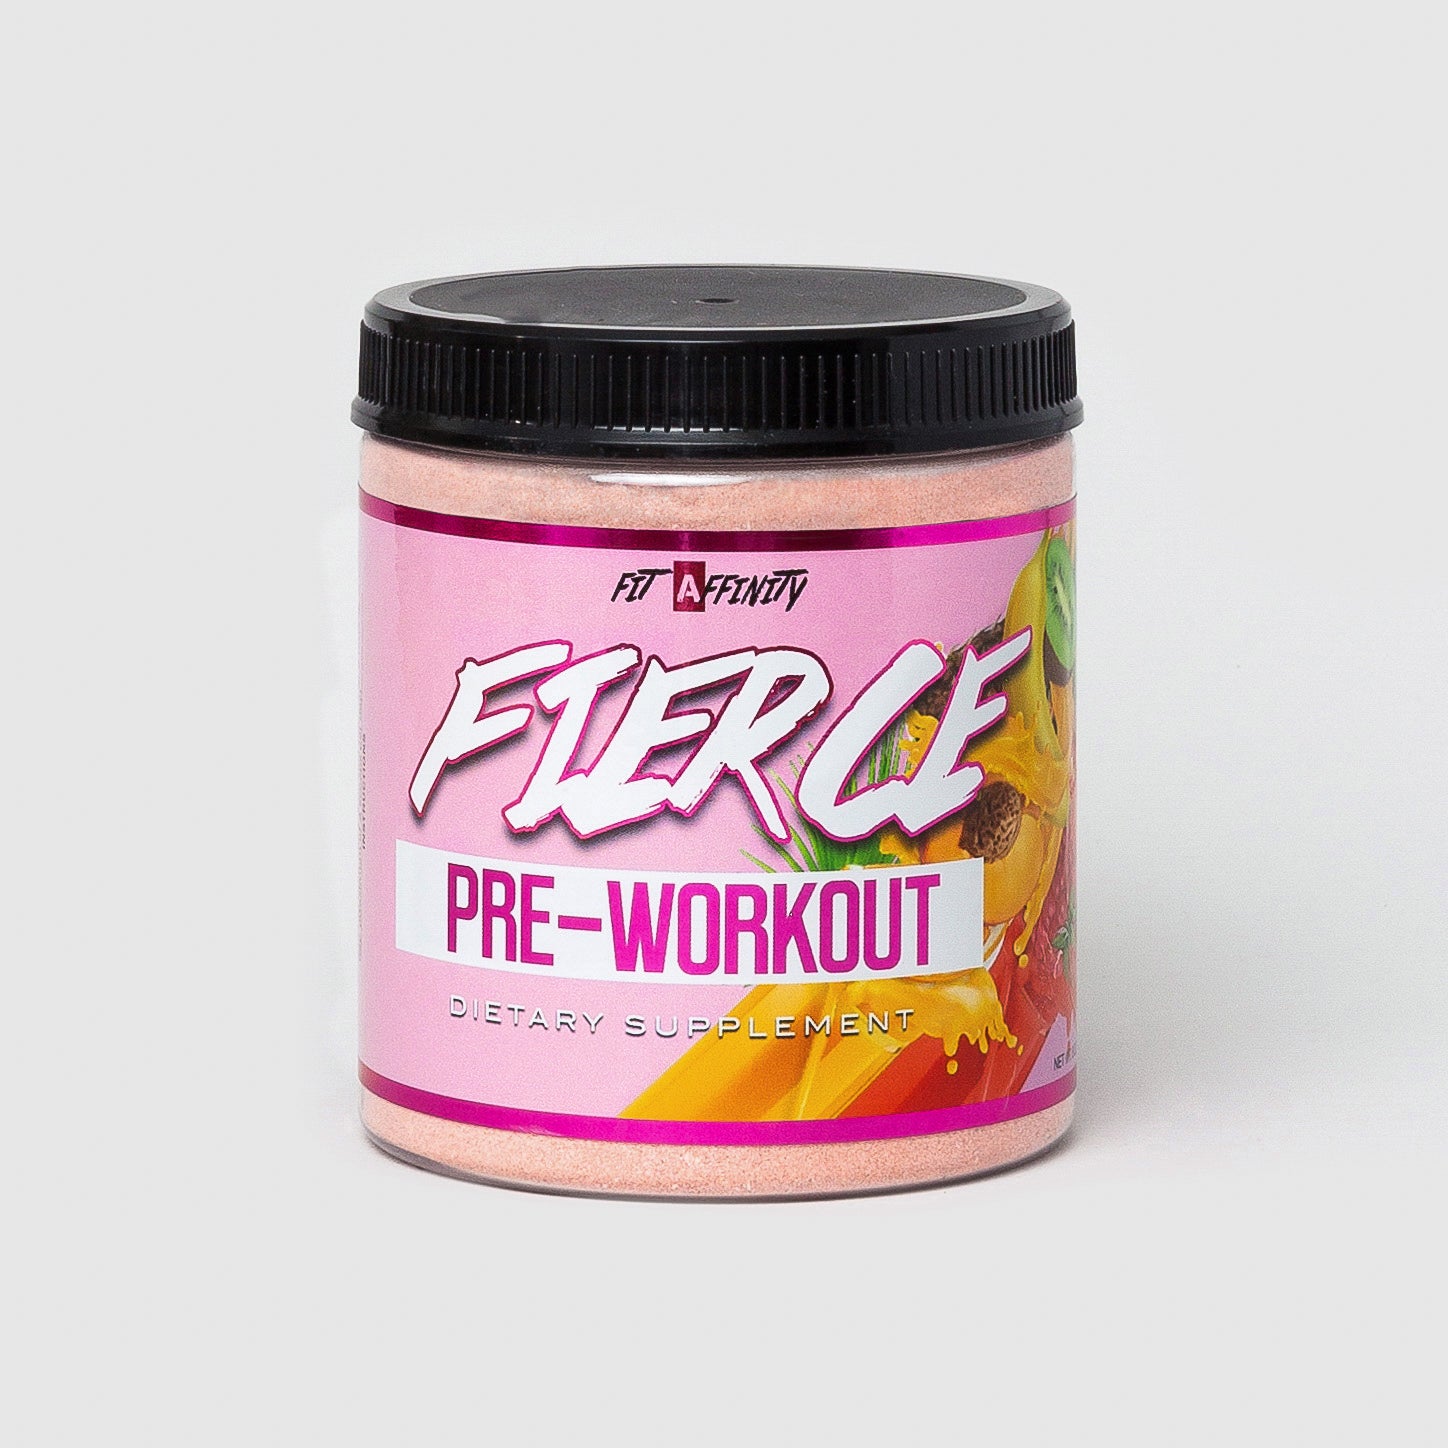 15 Minute Pre Fierce Pre Workout for Gym